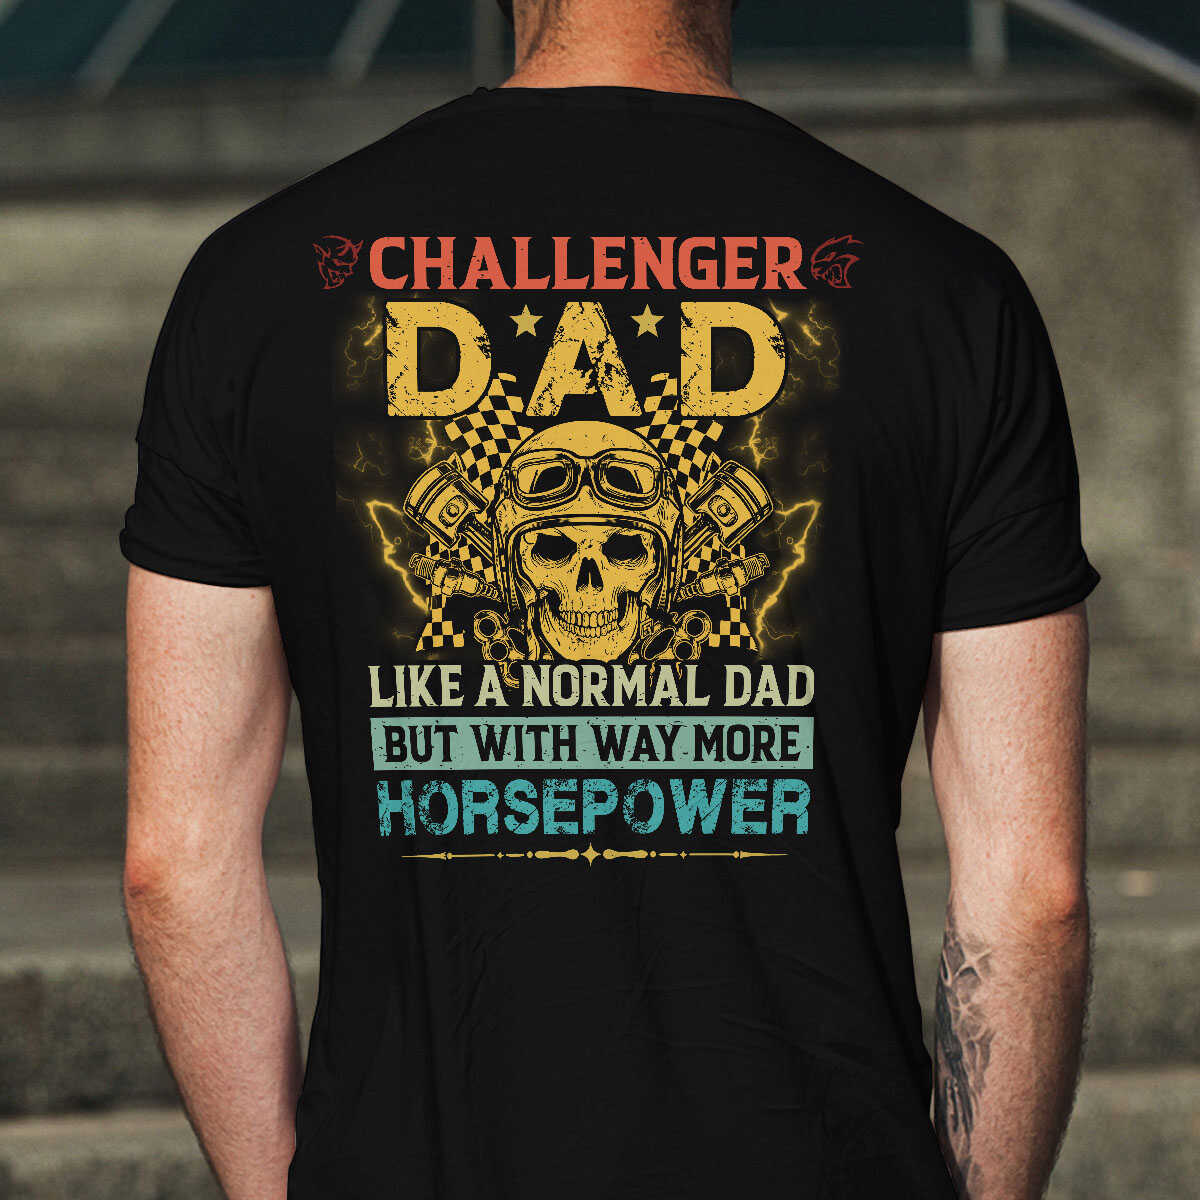 Challenger Dad T-shirt - Challenger Dad Has Way More Horsepower